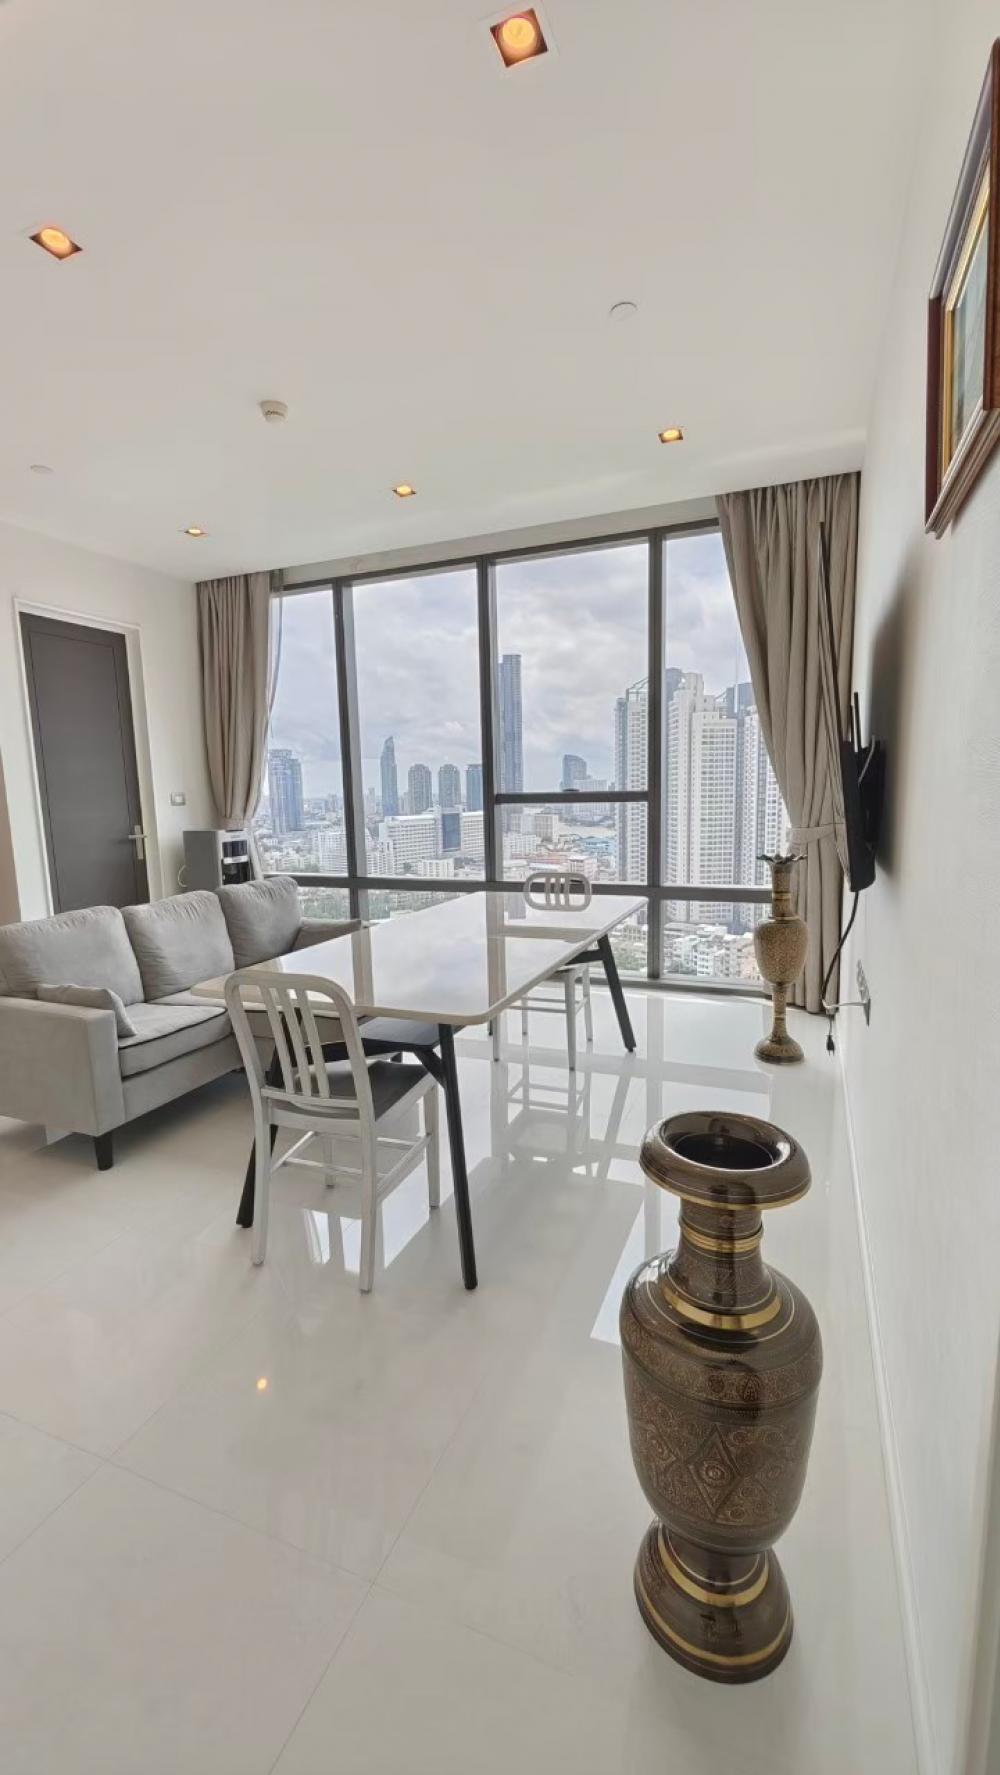 For RentCondoWongwianyai, Charoennakor : For rent, The Bangkok Sathorn condo room, 26th floor, very beautiful view, 1 bedroom, 1 bathroom, 68 square meters, private lift, very good location, next to BTS Surasak, easy to get on the expressway.